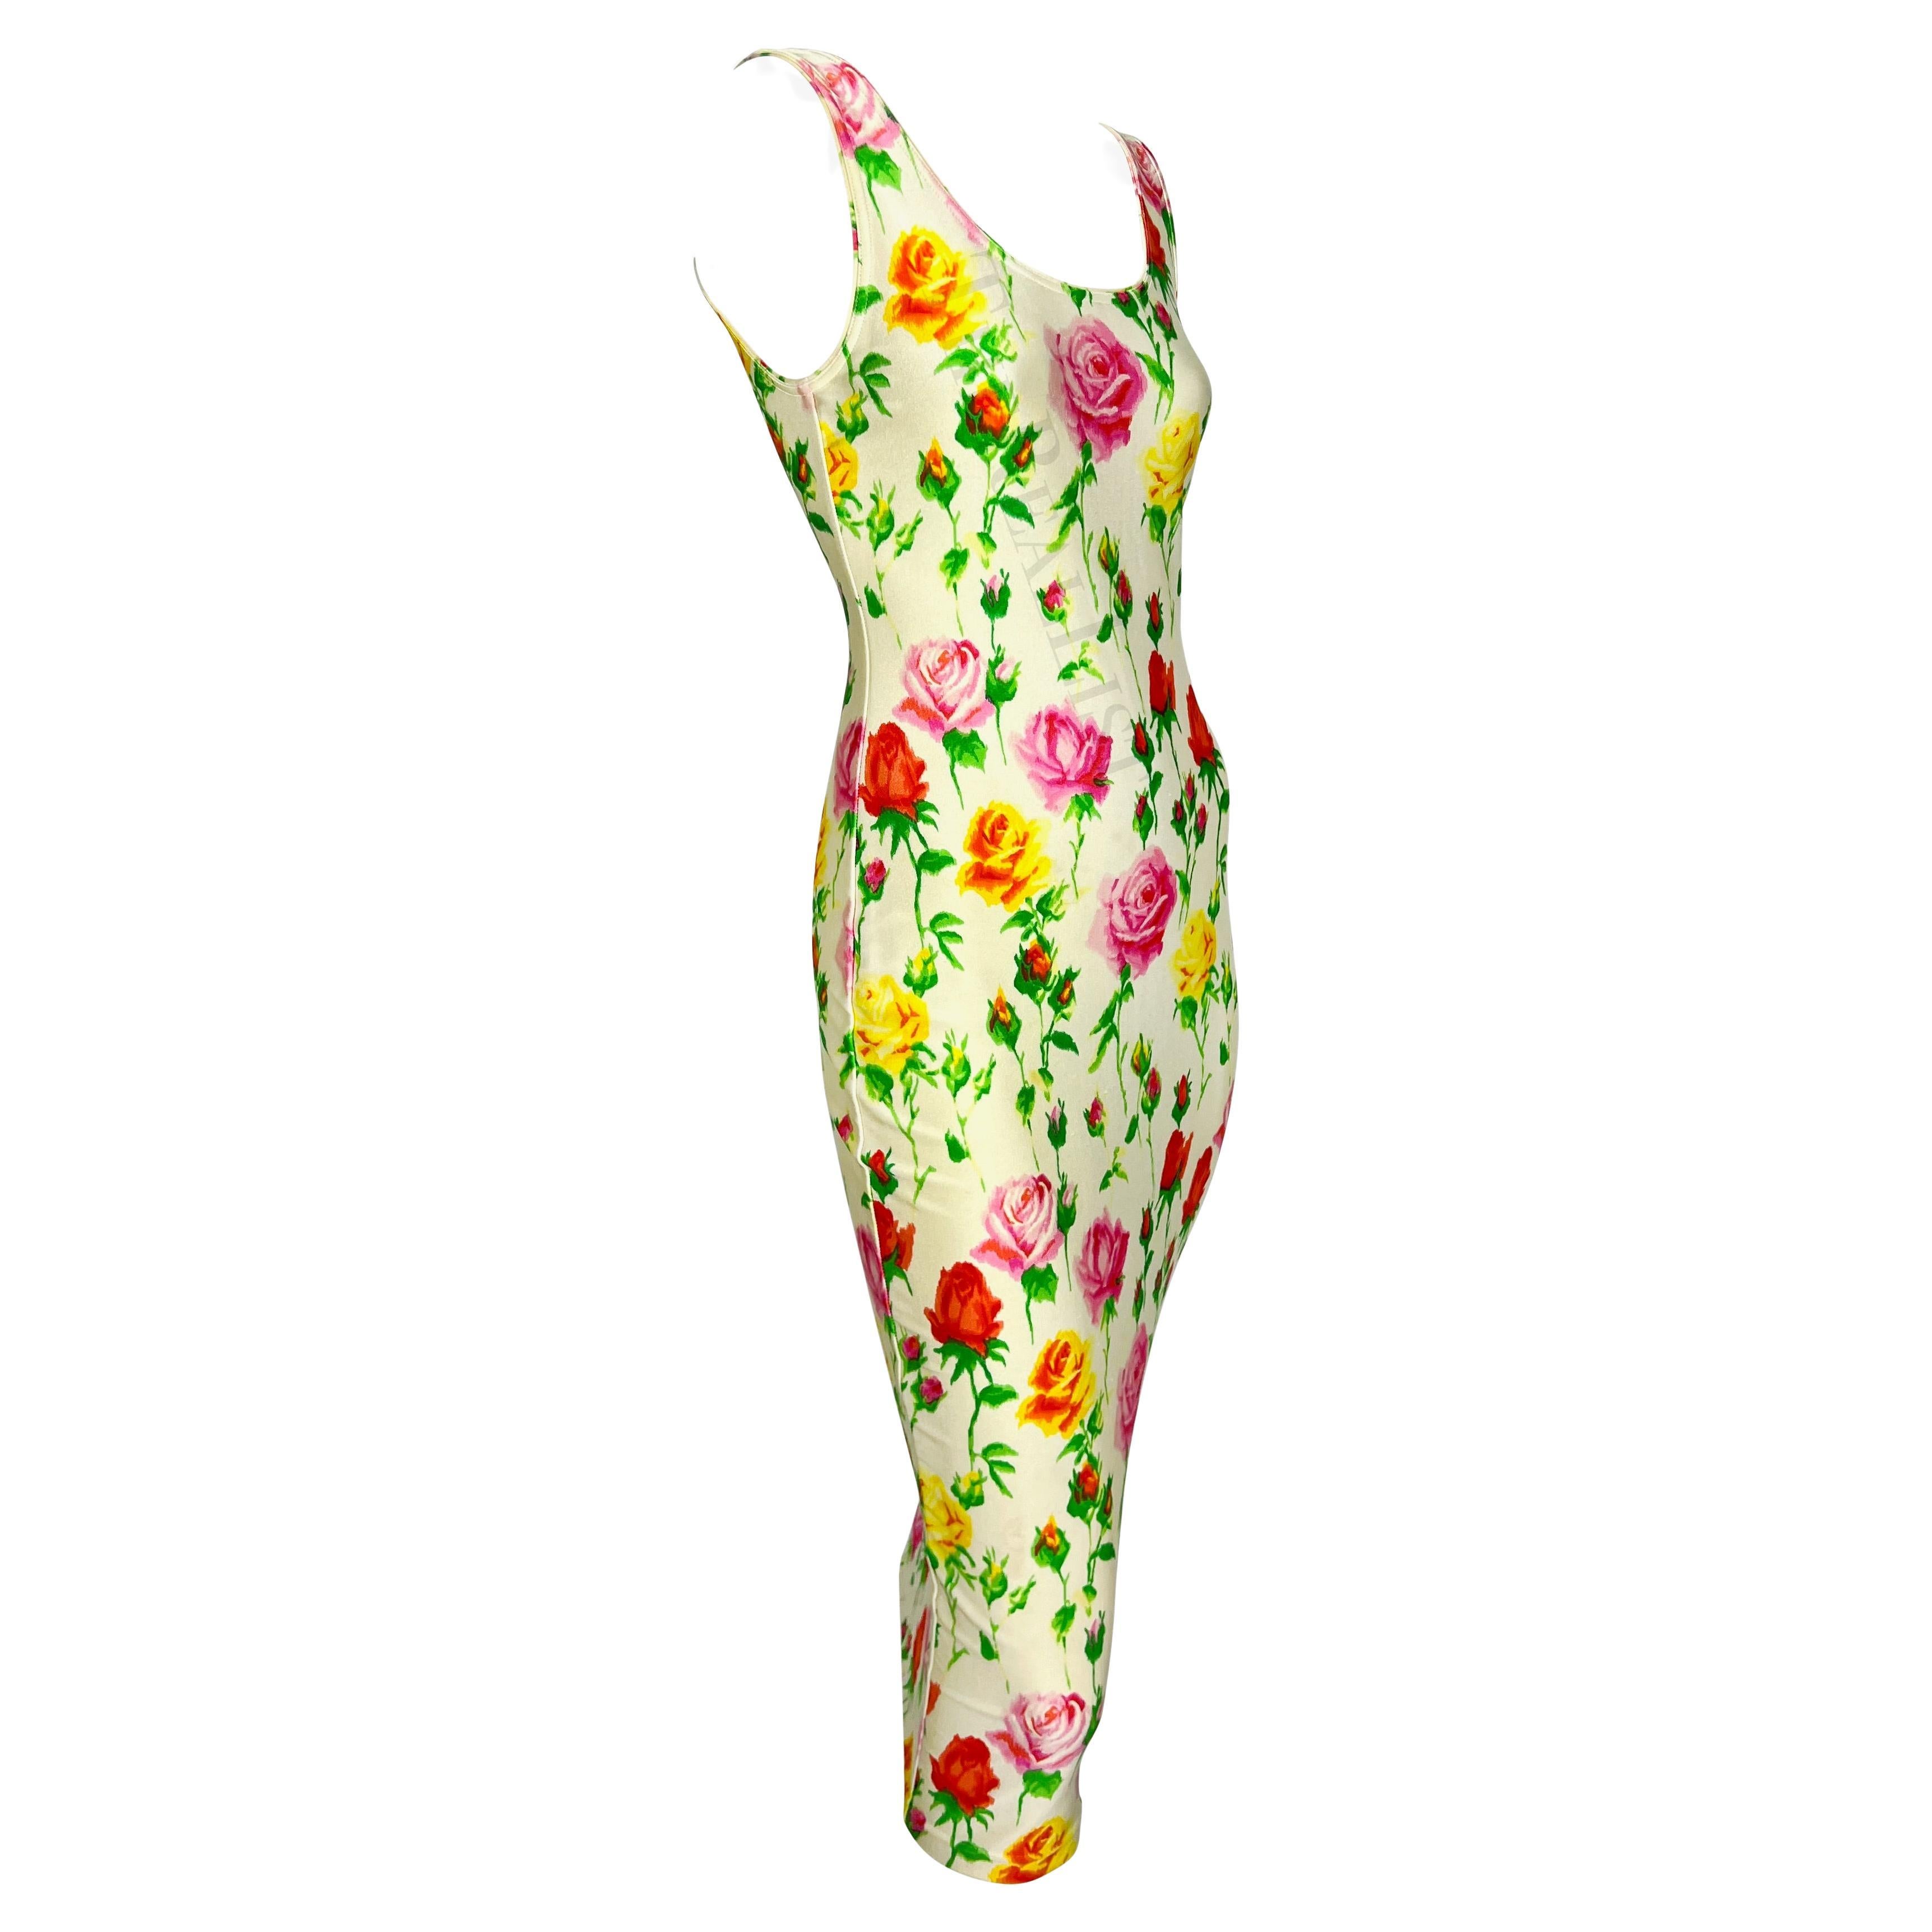 S/S 1995 Gianni Versace Runway White Floral Rose Bodycon Dress For Sale 5